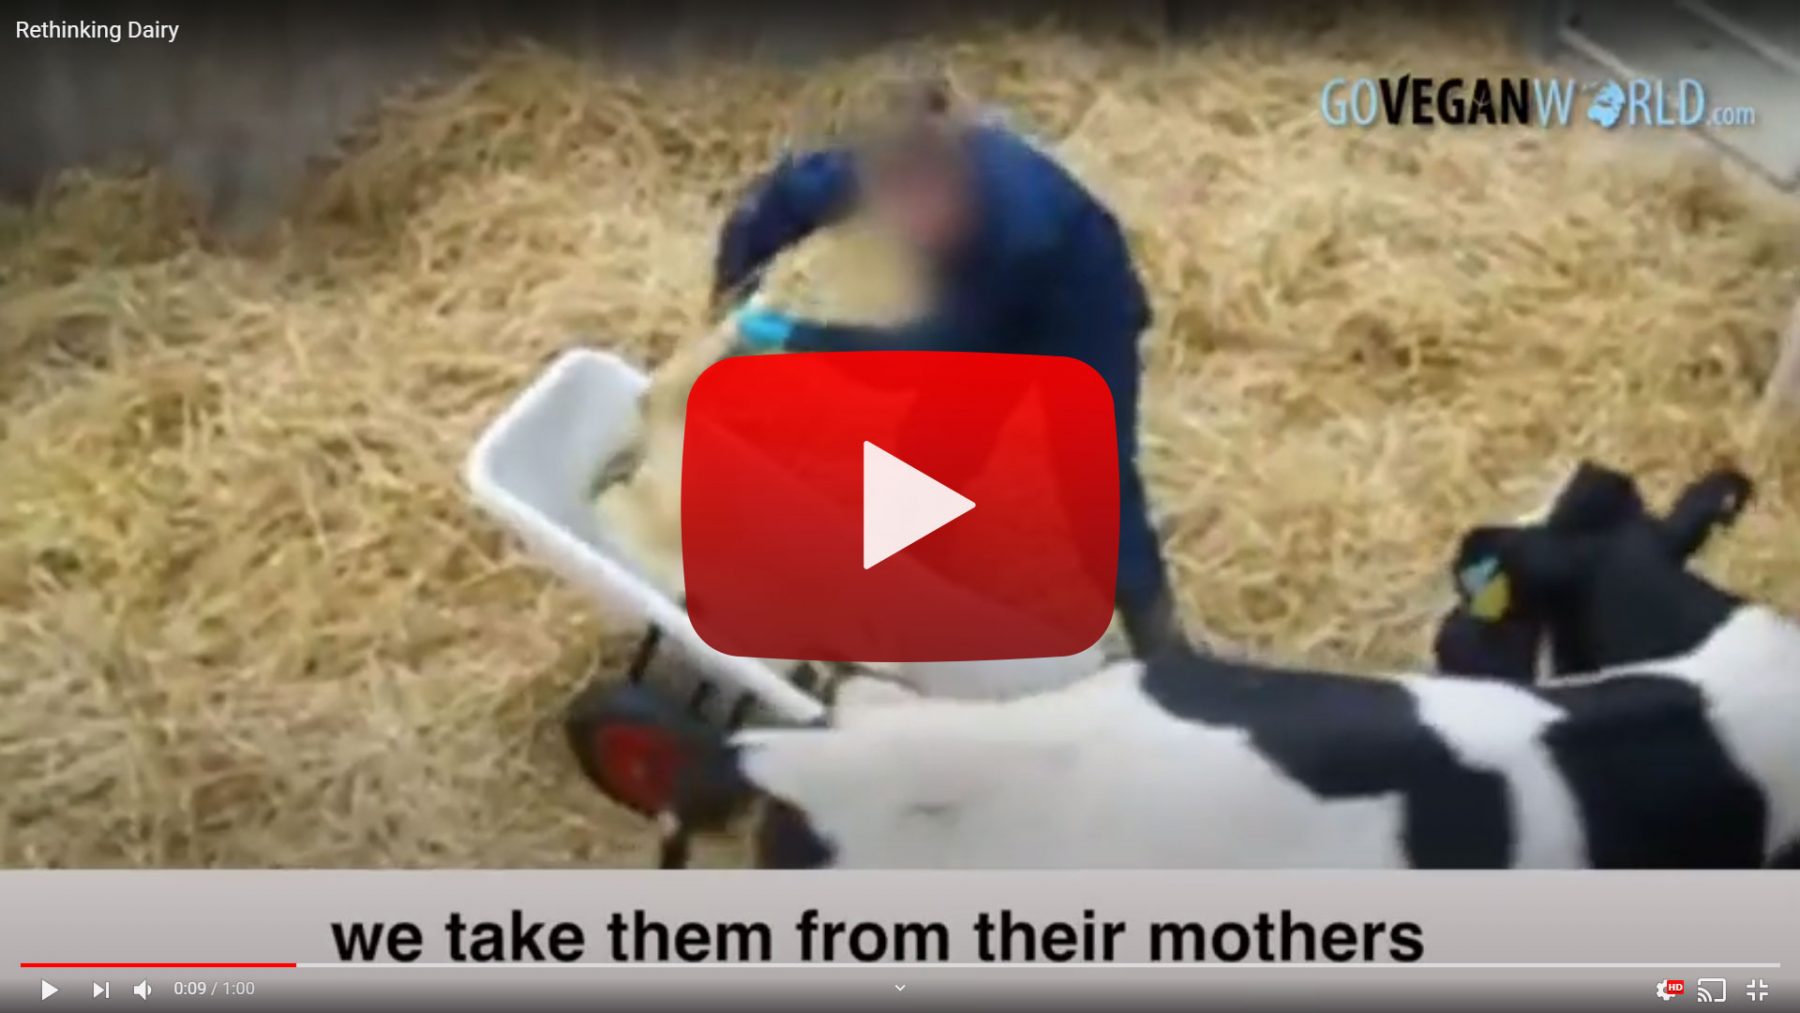 Rethinking Dairy - link to video